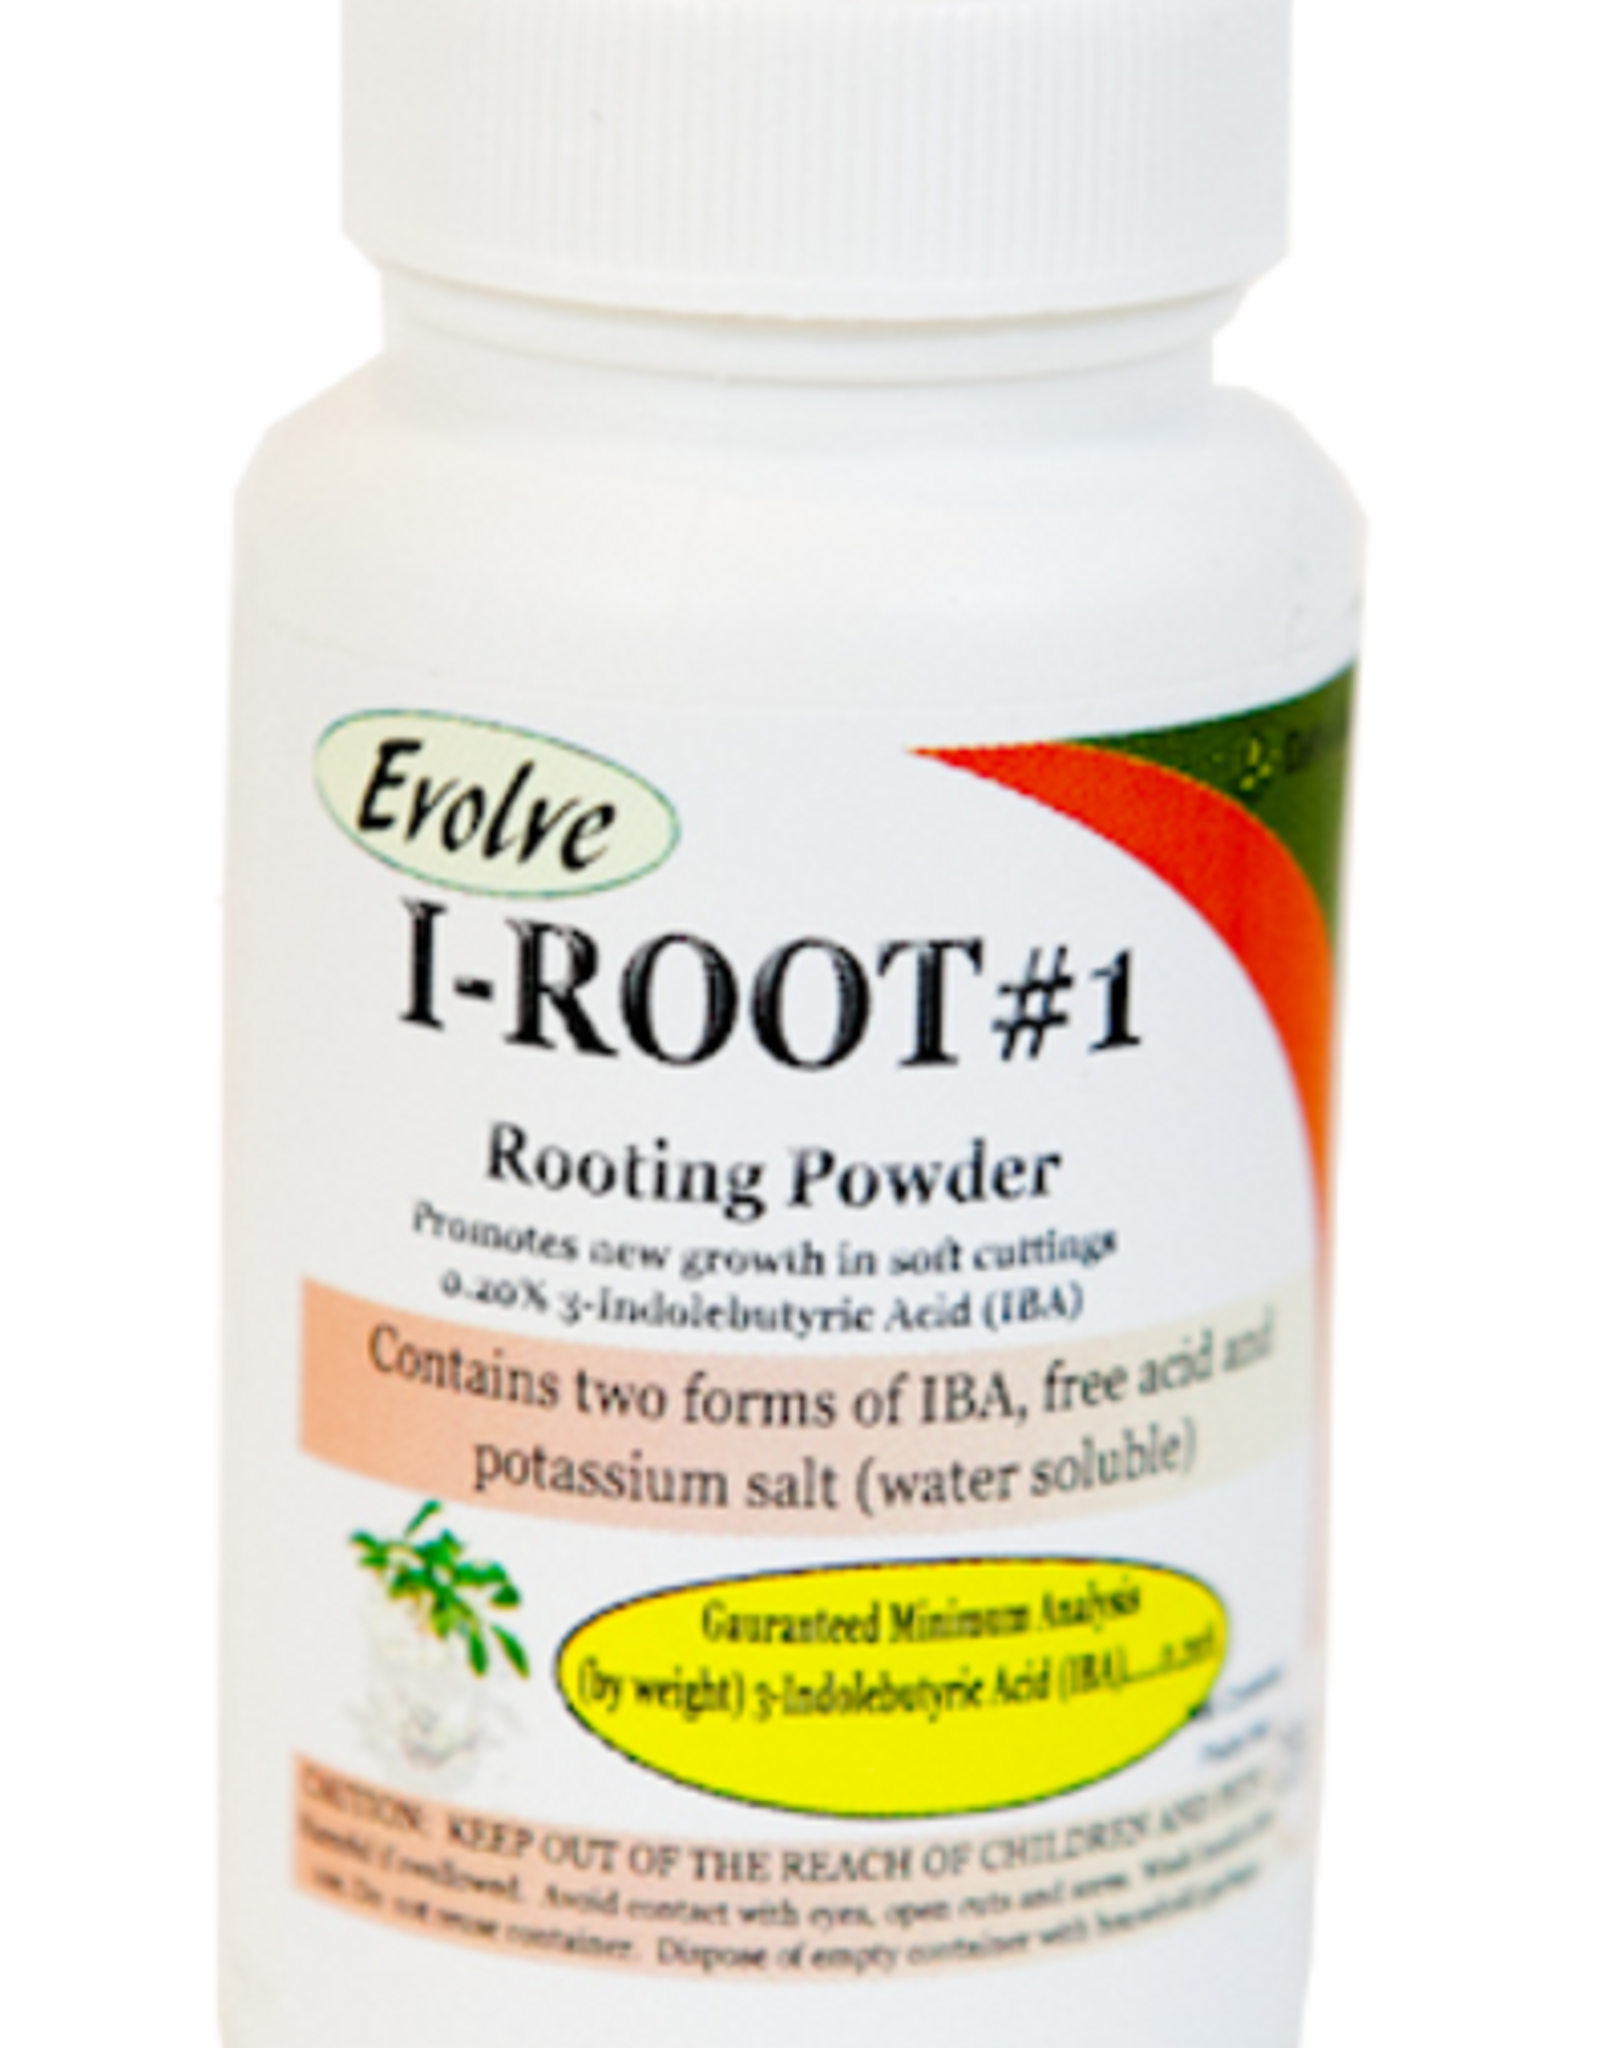 Evolve I-ROOT #1 Rooting Powder - Softwood